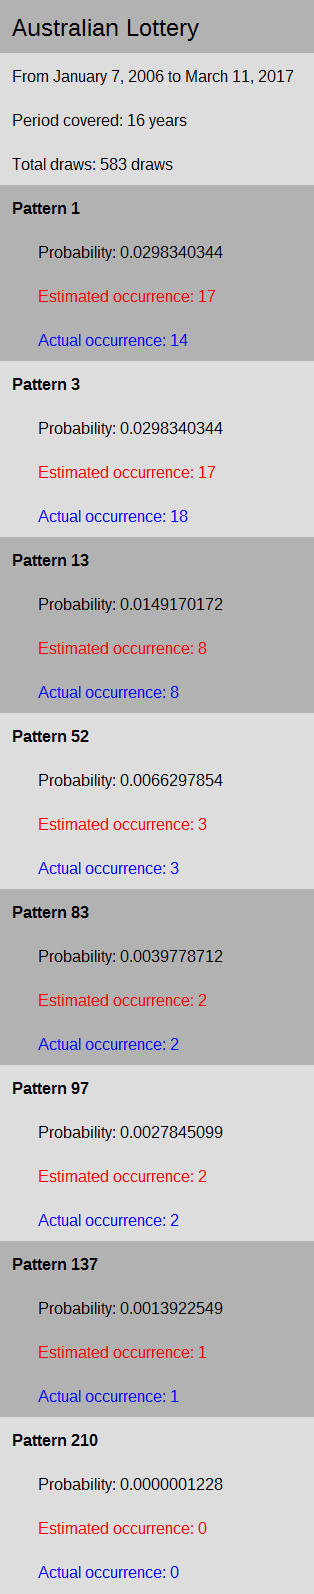 Australian results showing the different probability of patterns used for lottery prediction